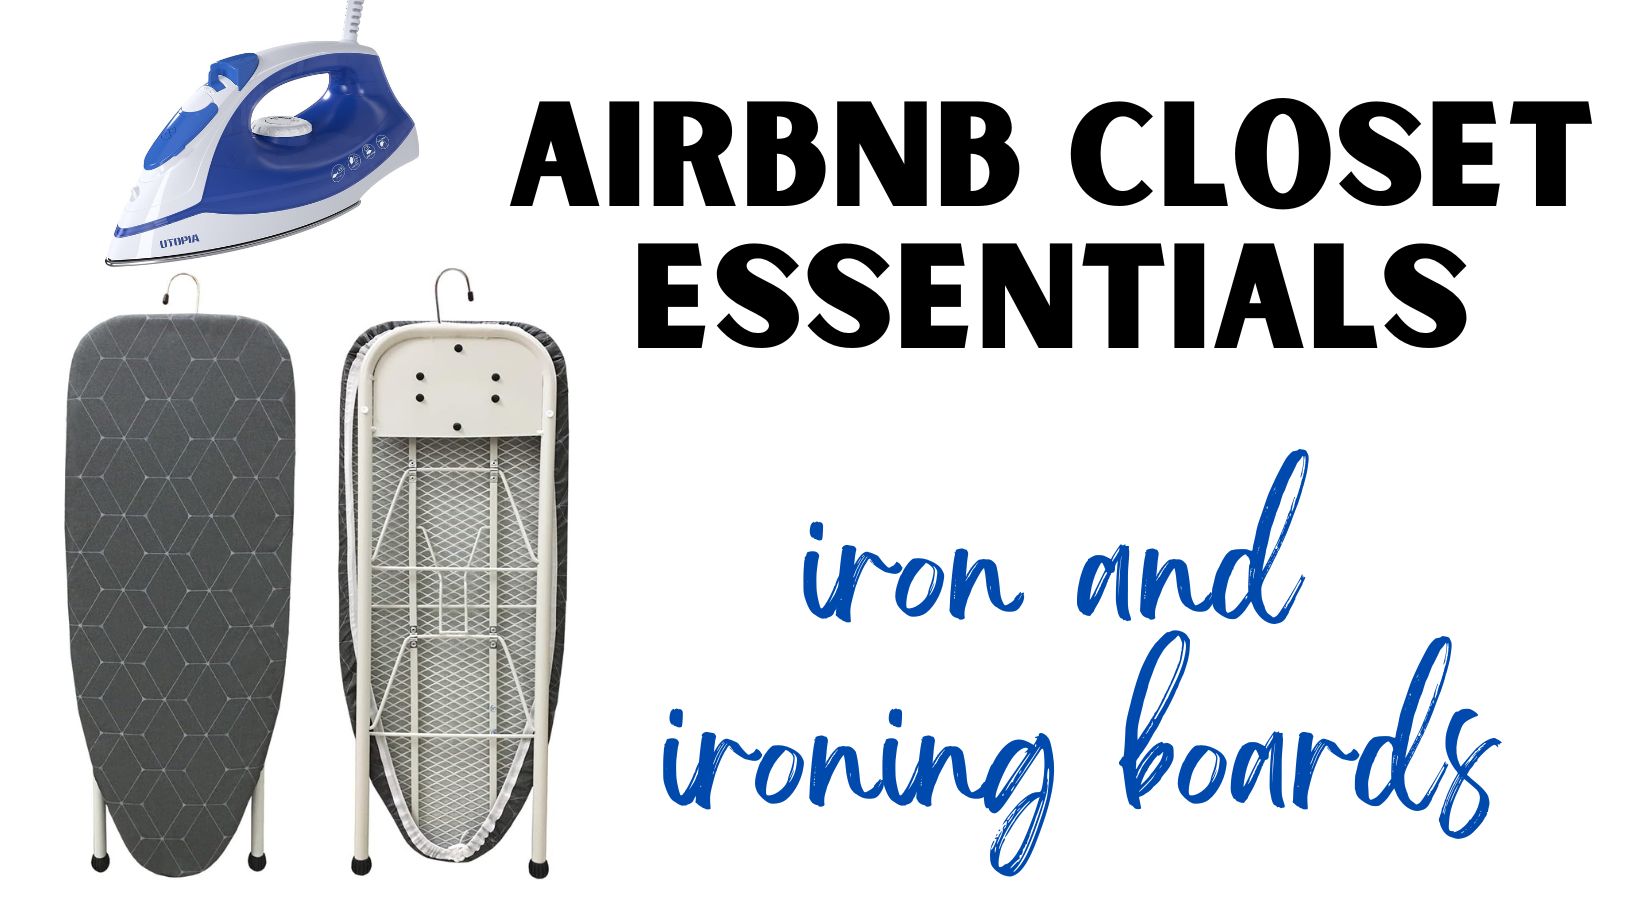 Airbnb Closet Irons and Ironing Boards